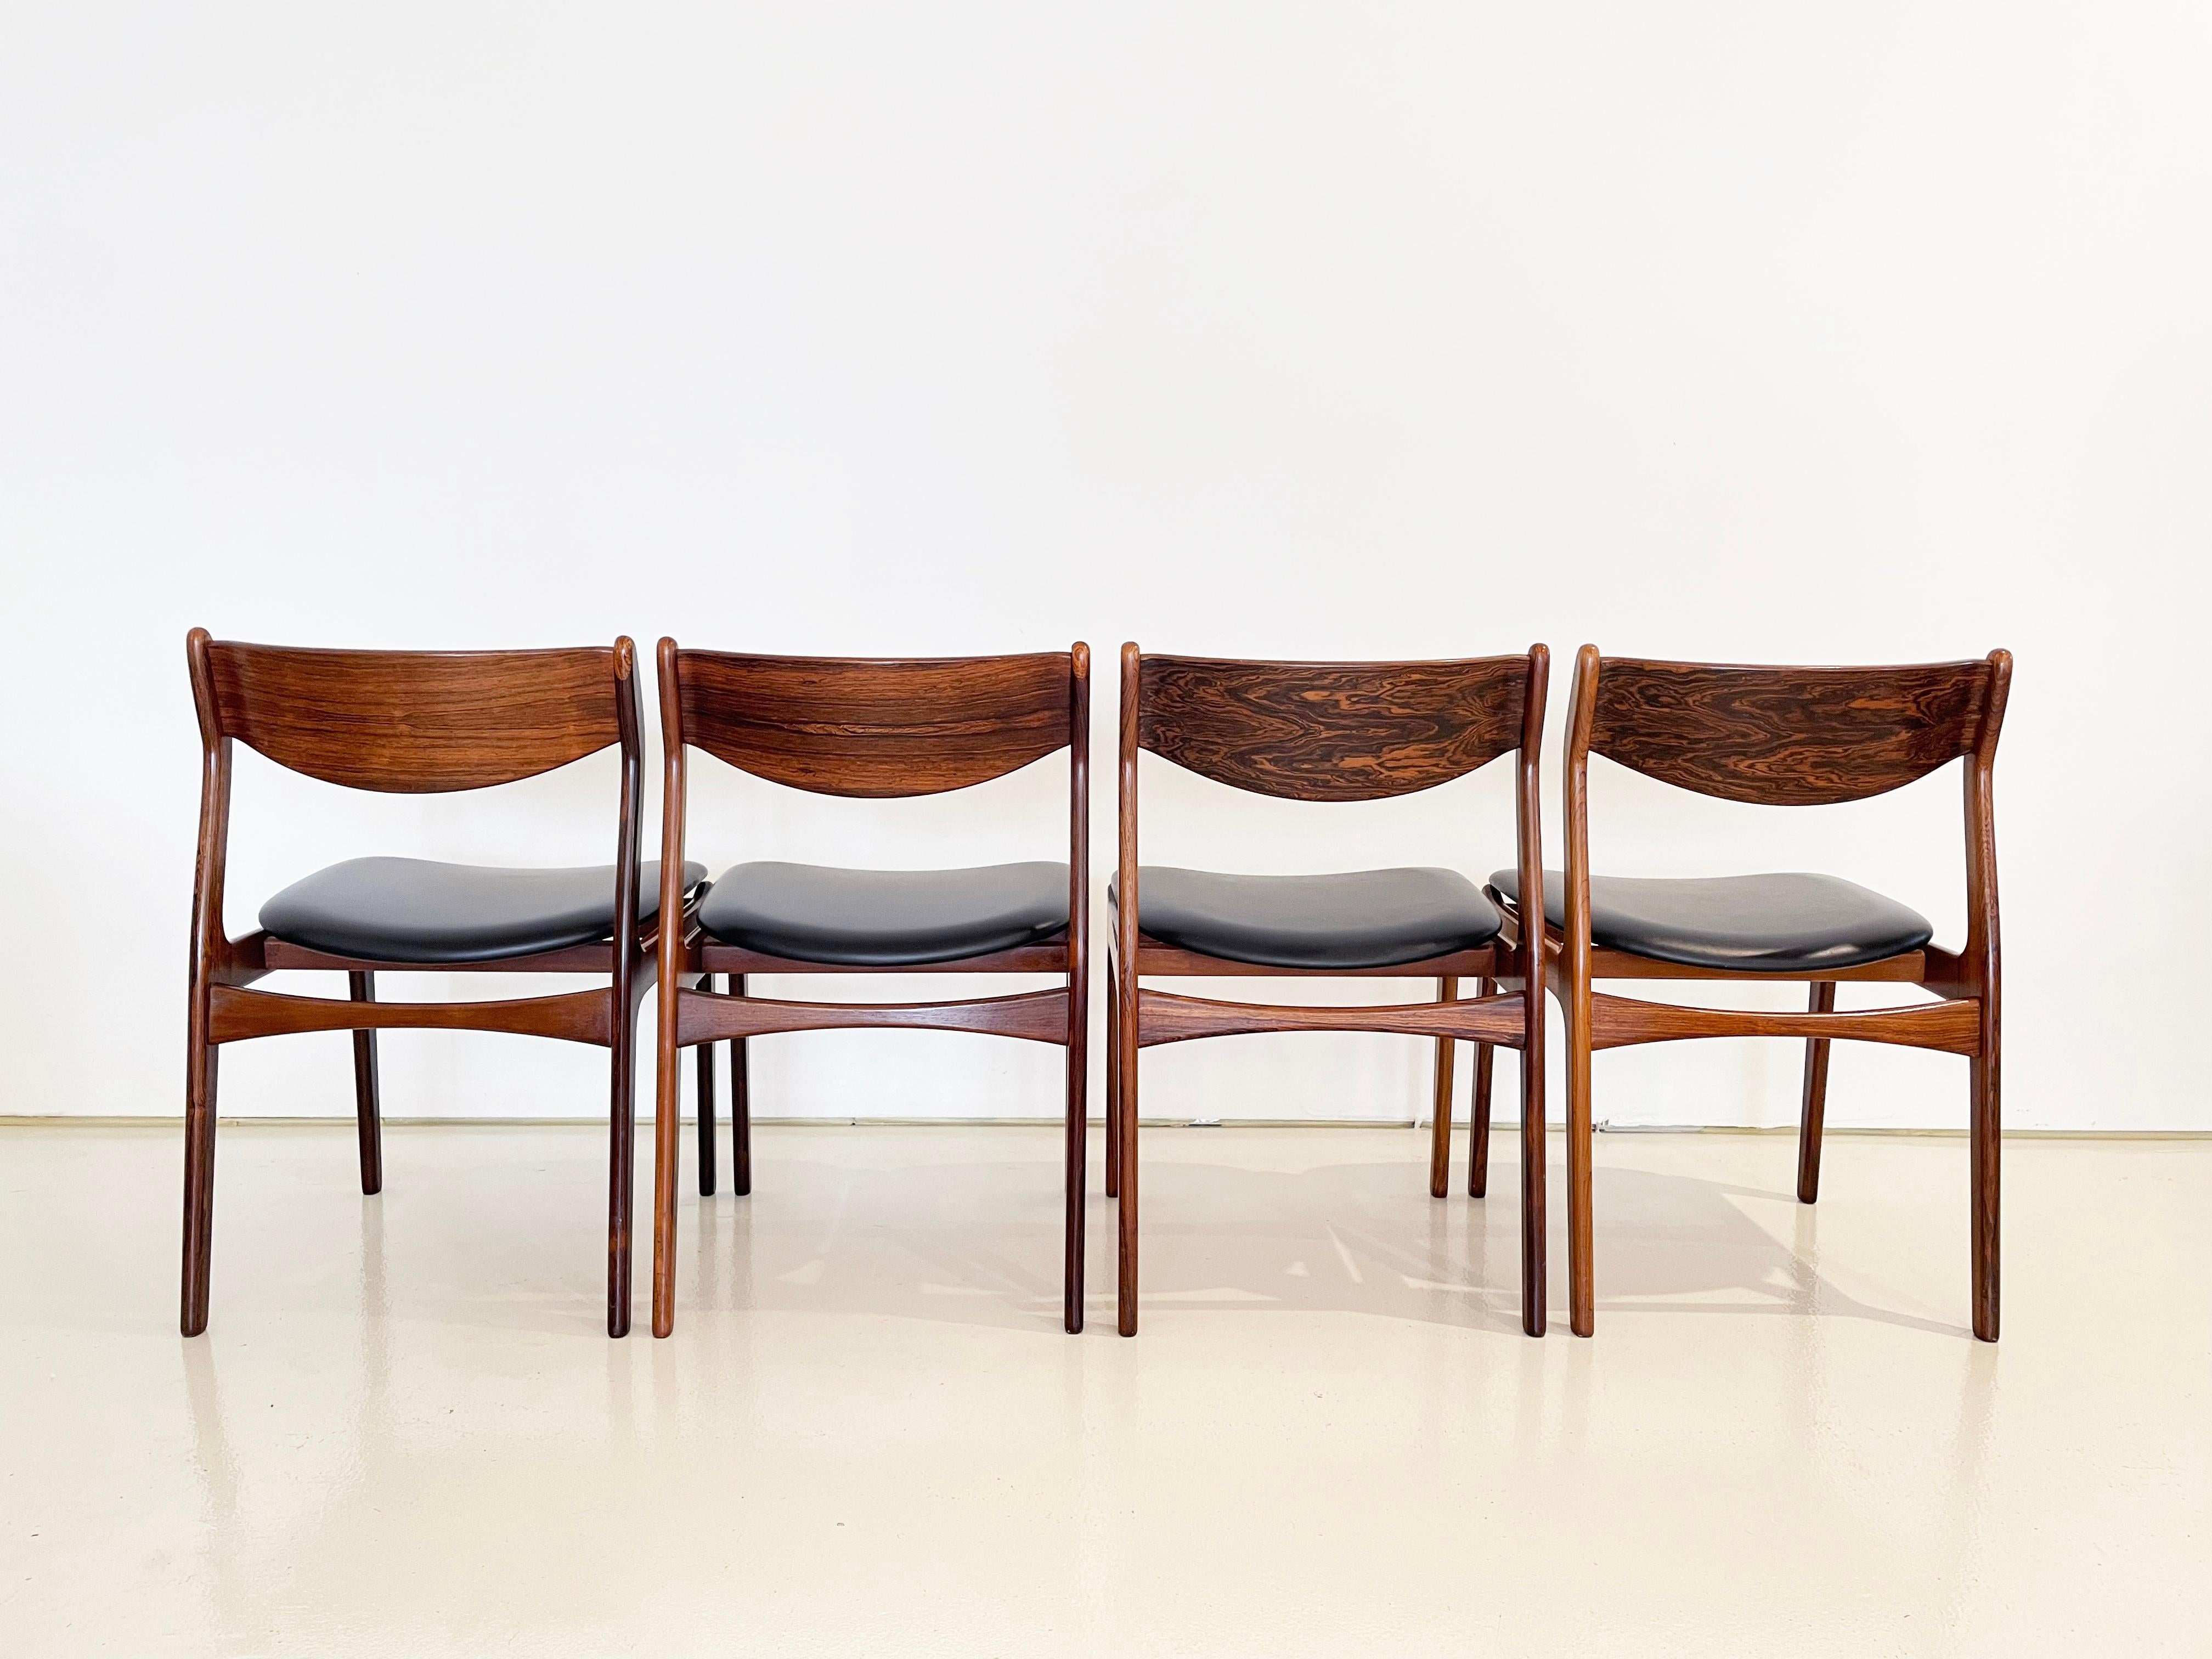 Vintage Mid-century Danish Dining Chairs, Designed by P.E. Jorgensen, Set of 8 For Sale 1